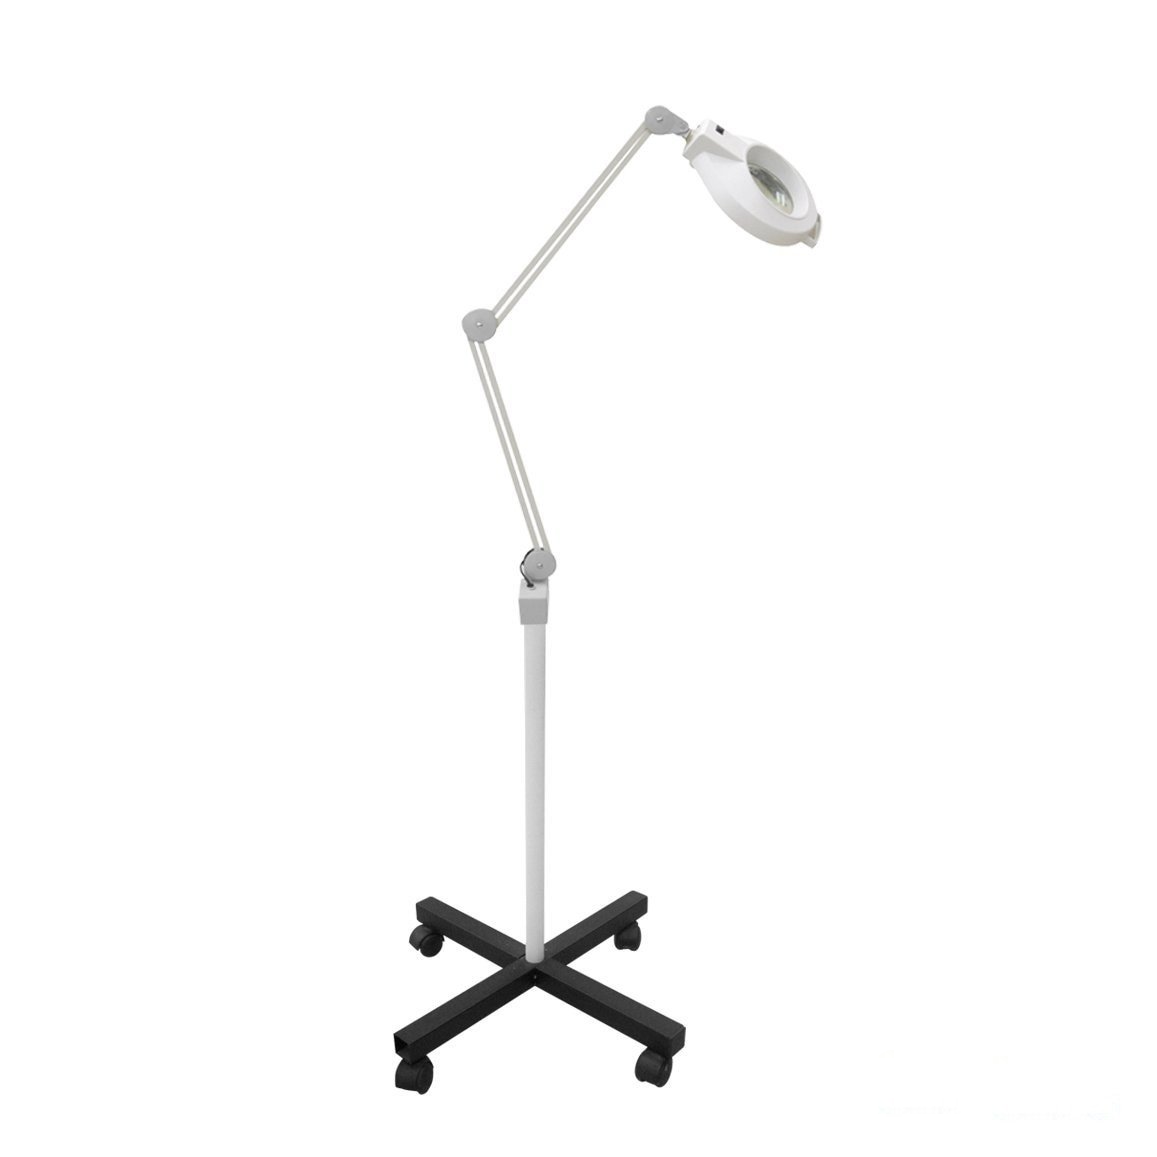 Dermalogic Dermalogic Coppell Magnifying Lamp Facial Machine - ChairsThatGive